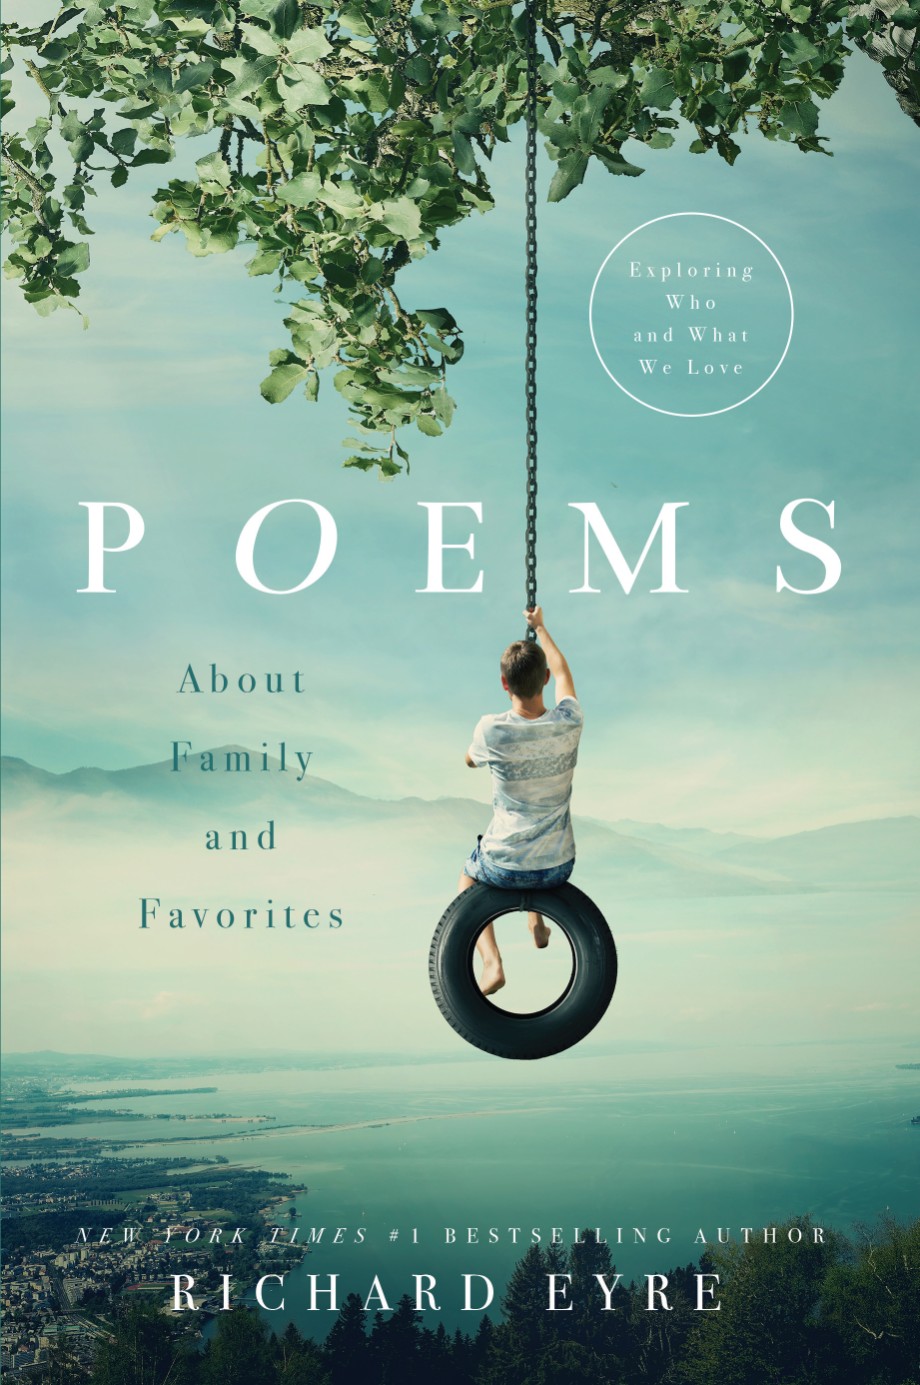 Poems About Family and Favorites: Exploring Who and What We Love